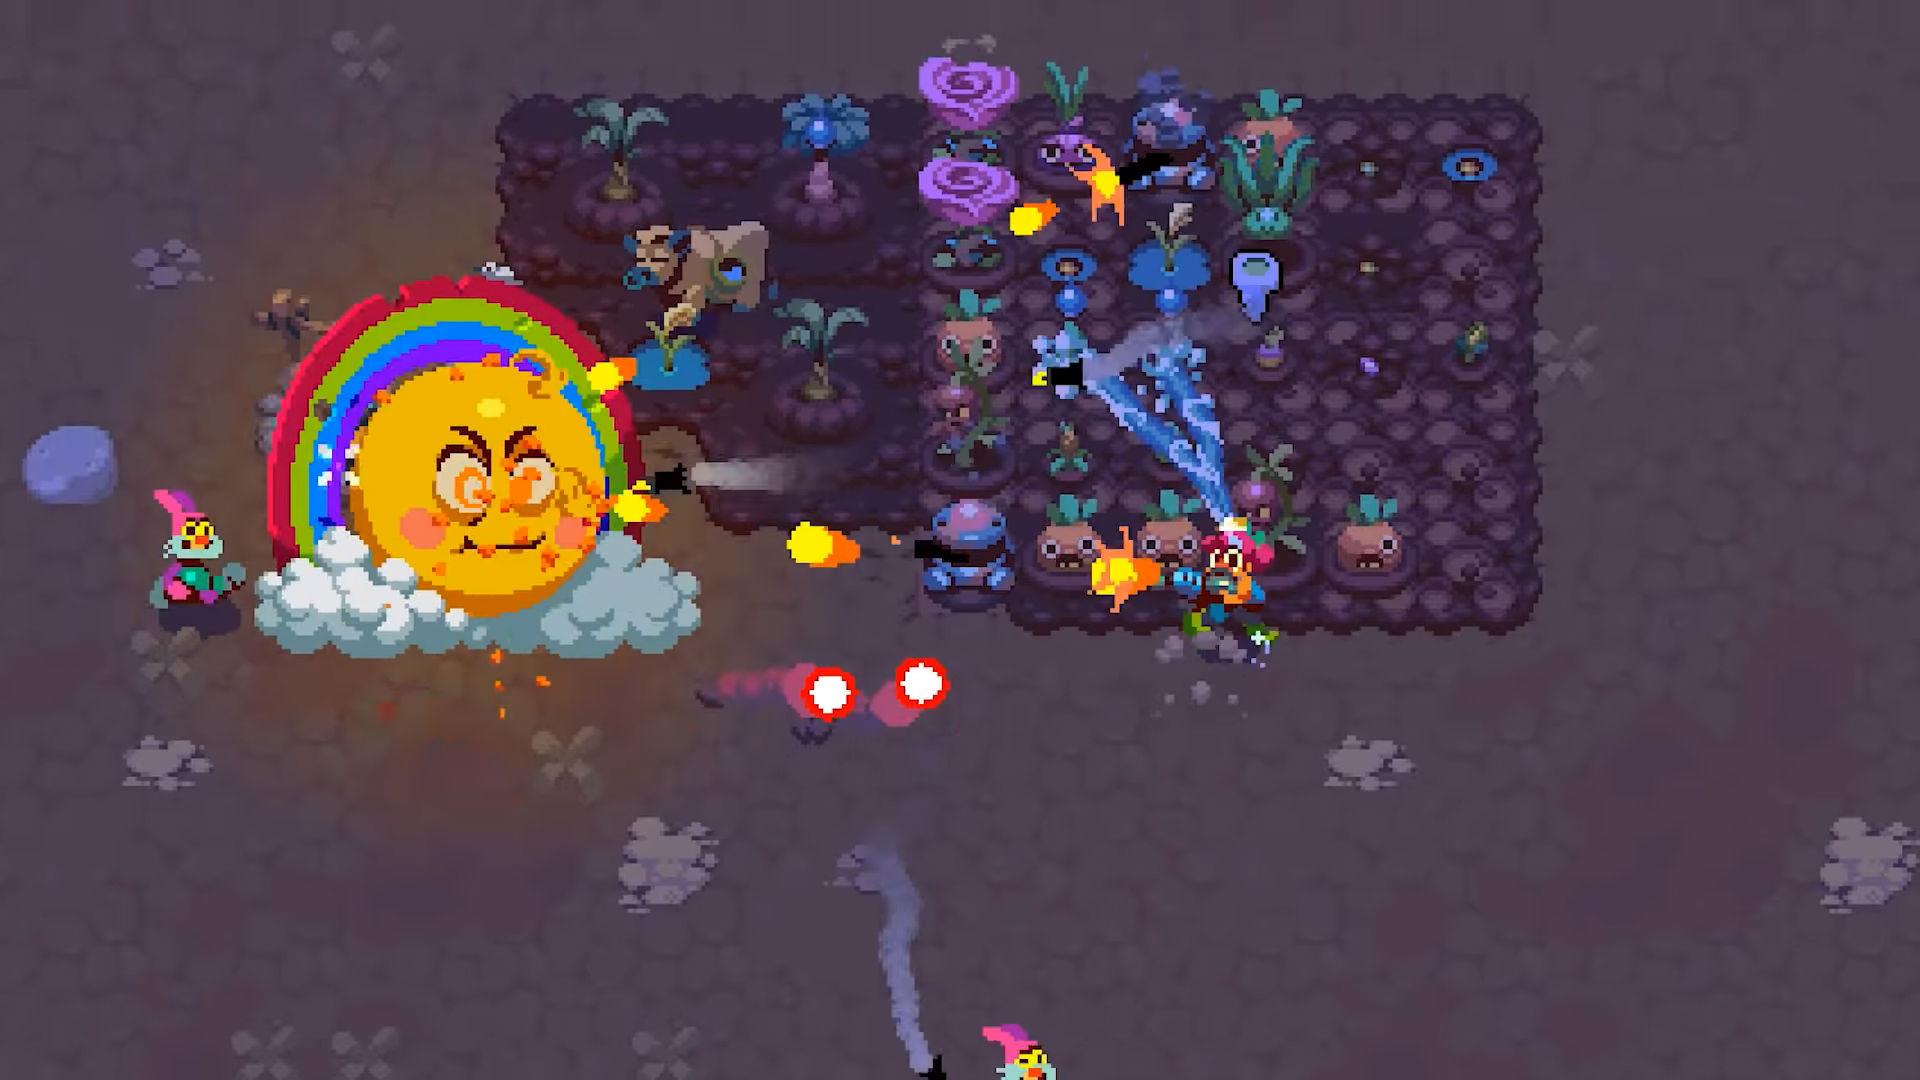 Atomicrops is the Stardew Valley shooter you didn't know you wanted